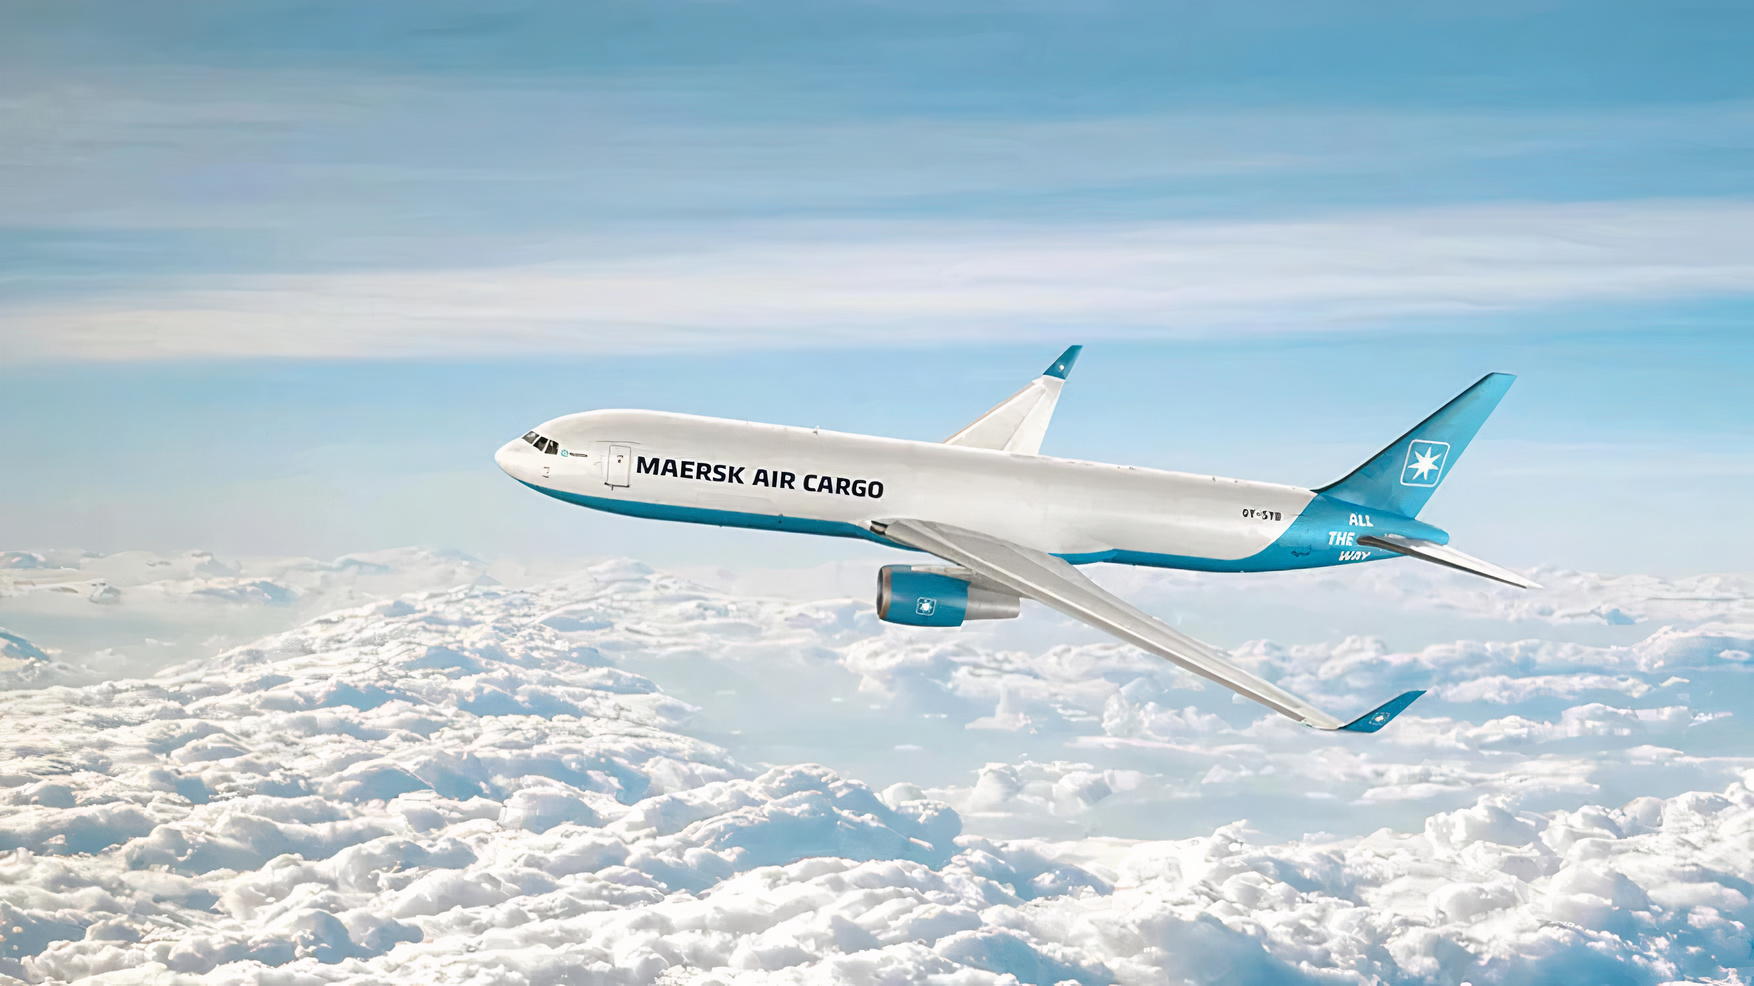 maersk now has its own air freight network